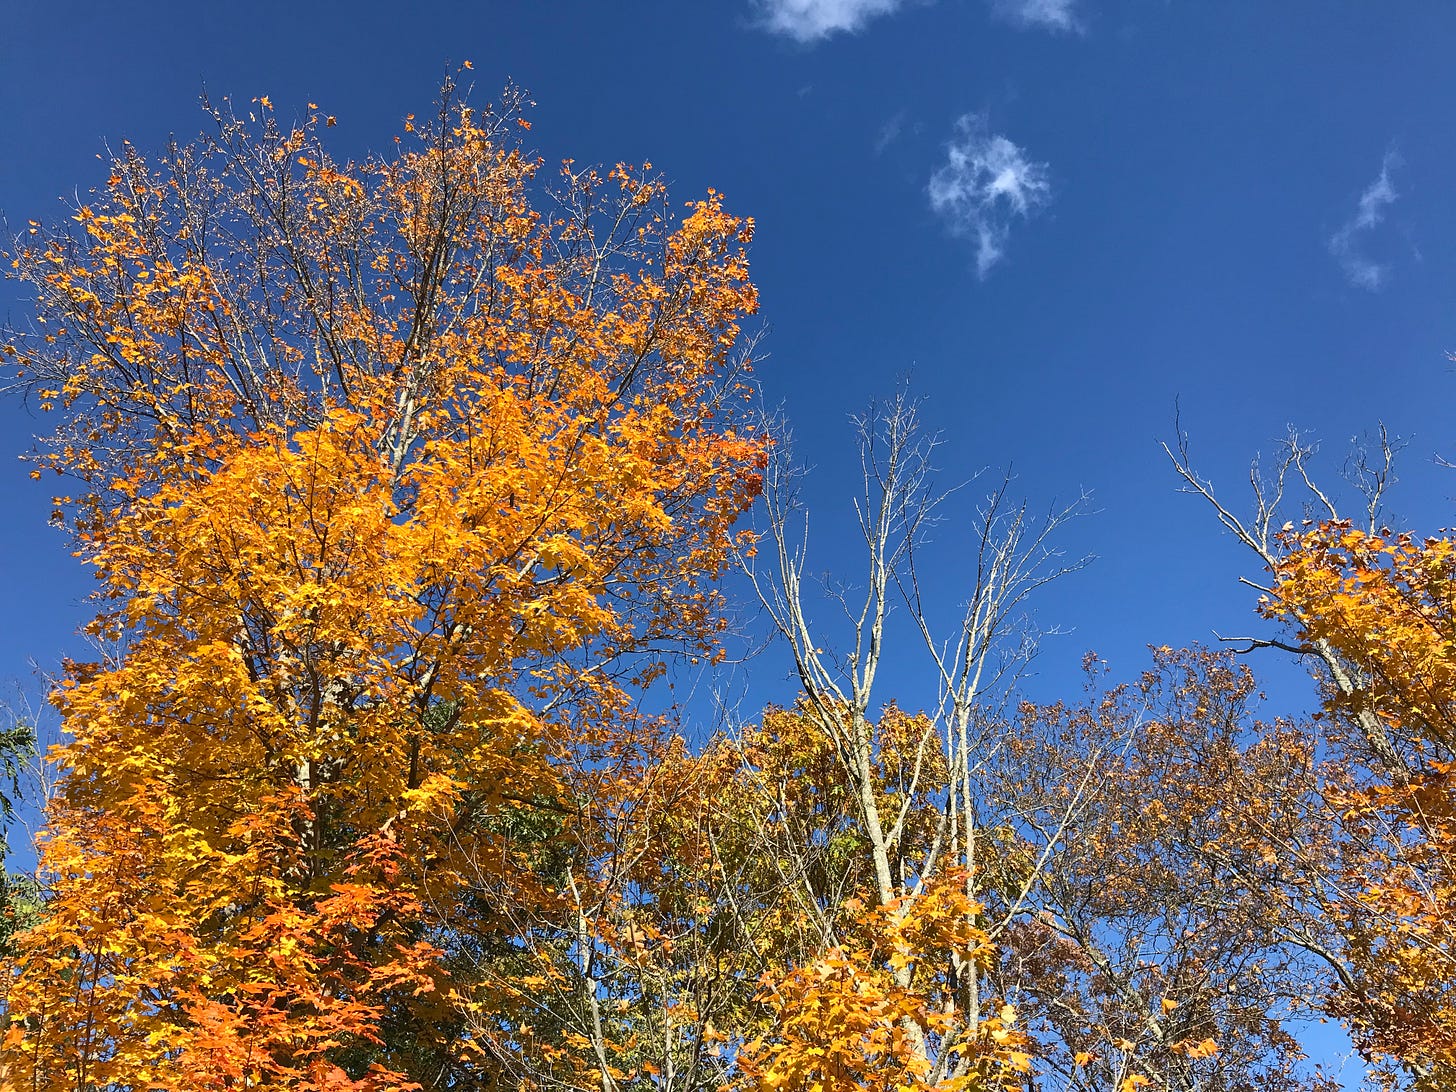 Trees with yellow leaves against a deep blue sky. Some clouds.